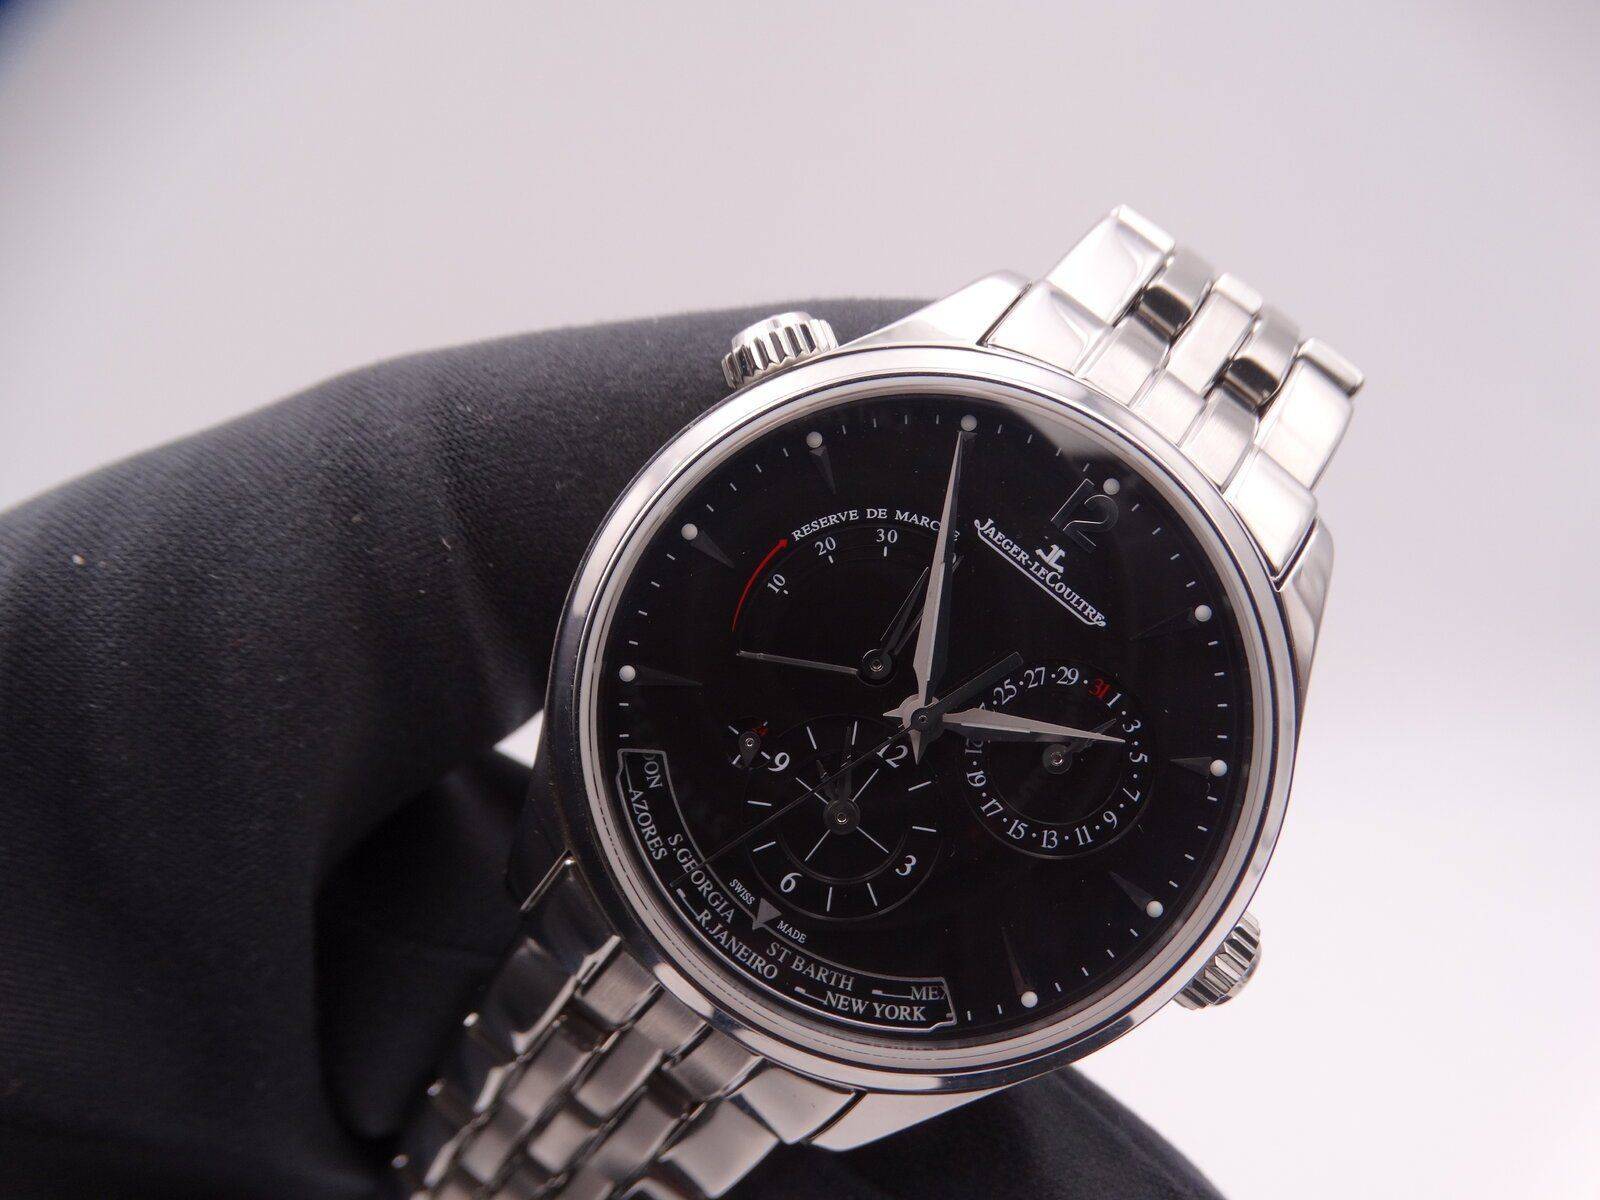 Jaeger-LeCoultre Master Geographic Dual Time Power Reserve 00269.JPG